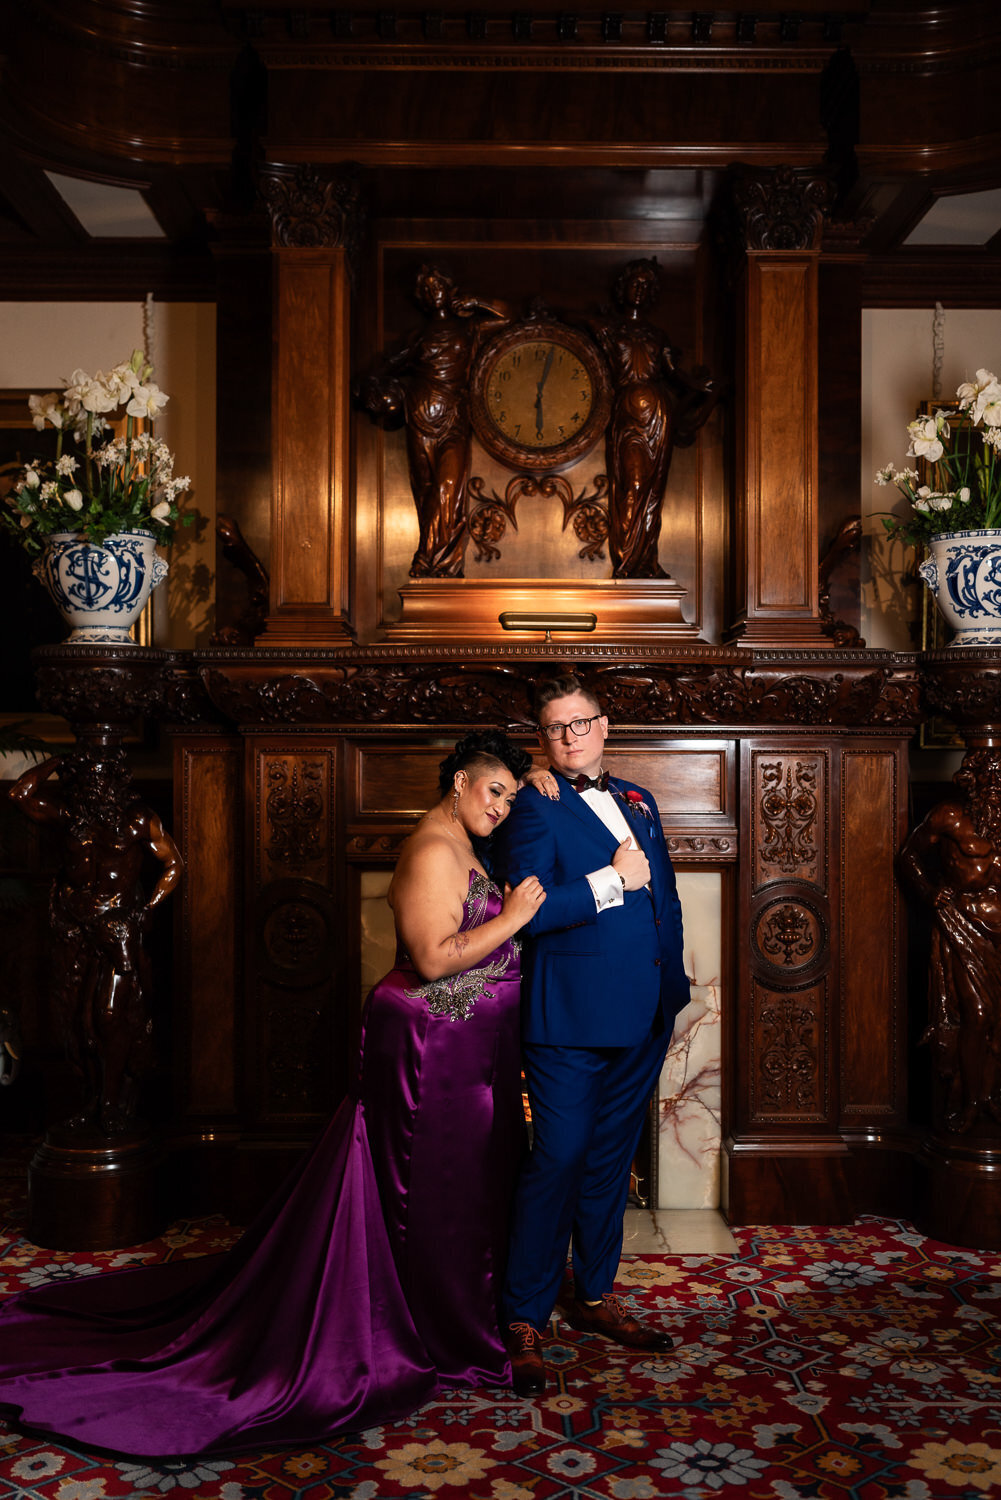 Filipino bride in purple dress and groom smile in front of a fireplace.